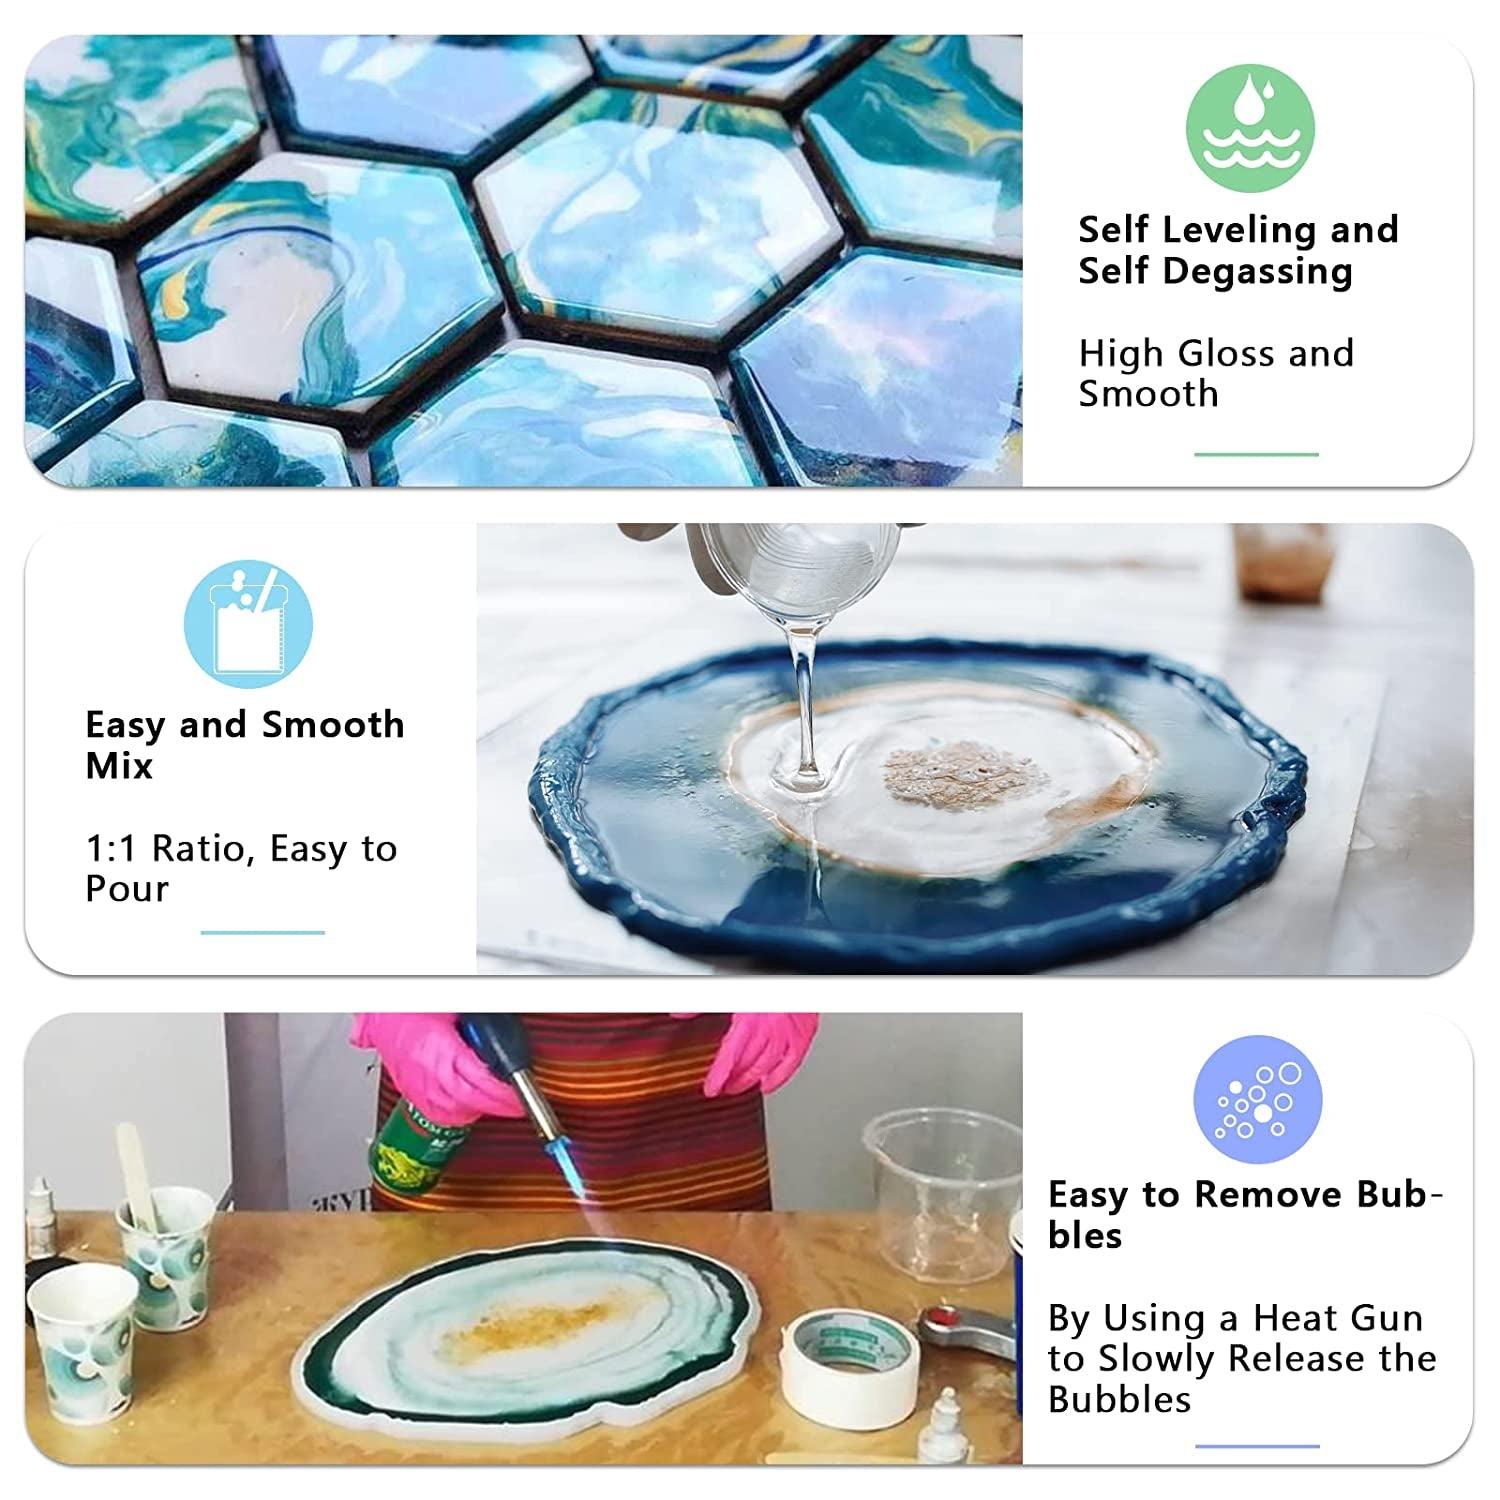 Epoxy Resin Kit for Beginners - 15.5 FL.OZ. Crystal Clear Casting and  Coating Epoxy Resin for Jewelry Making, Art, Crafts, Tumblers, River  Tables, UV Resistant, Easy Mix 1:1 Resin Epoxy Kit 